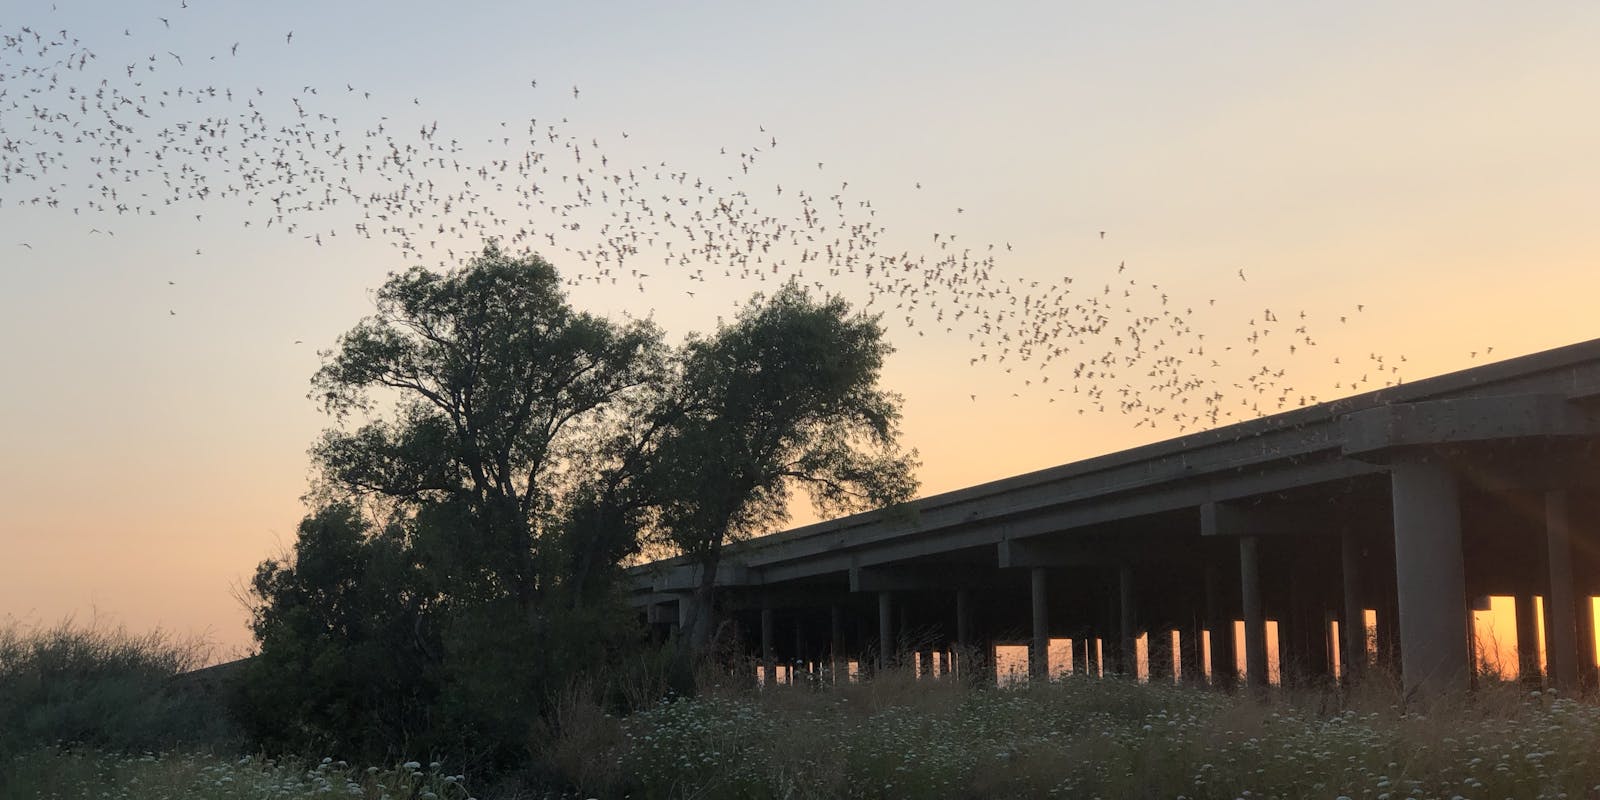 A ribbon of bats emerging from the causeway.